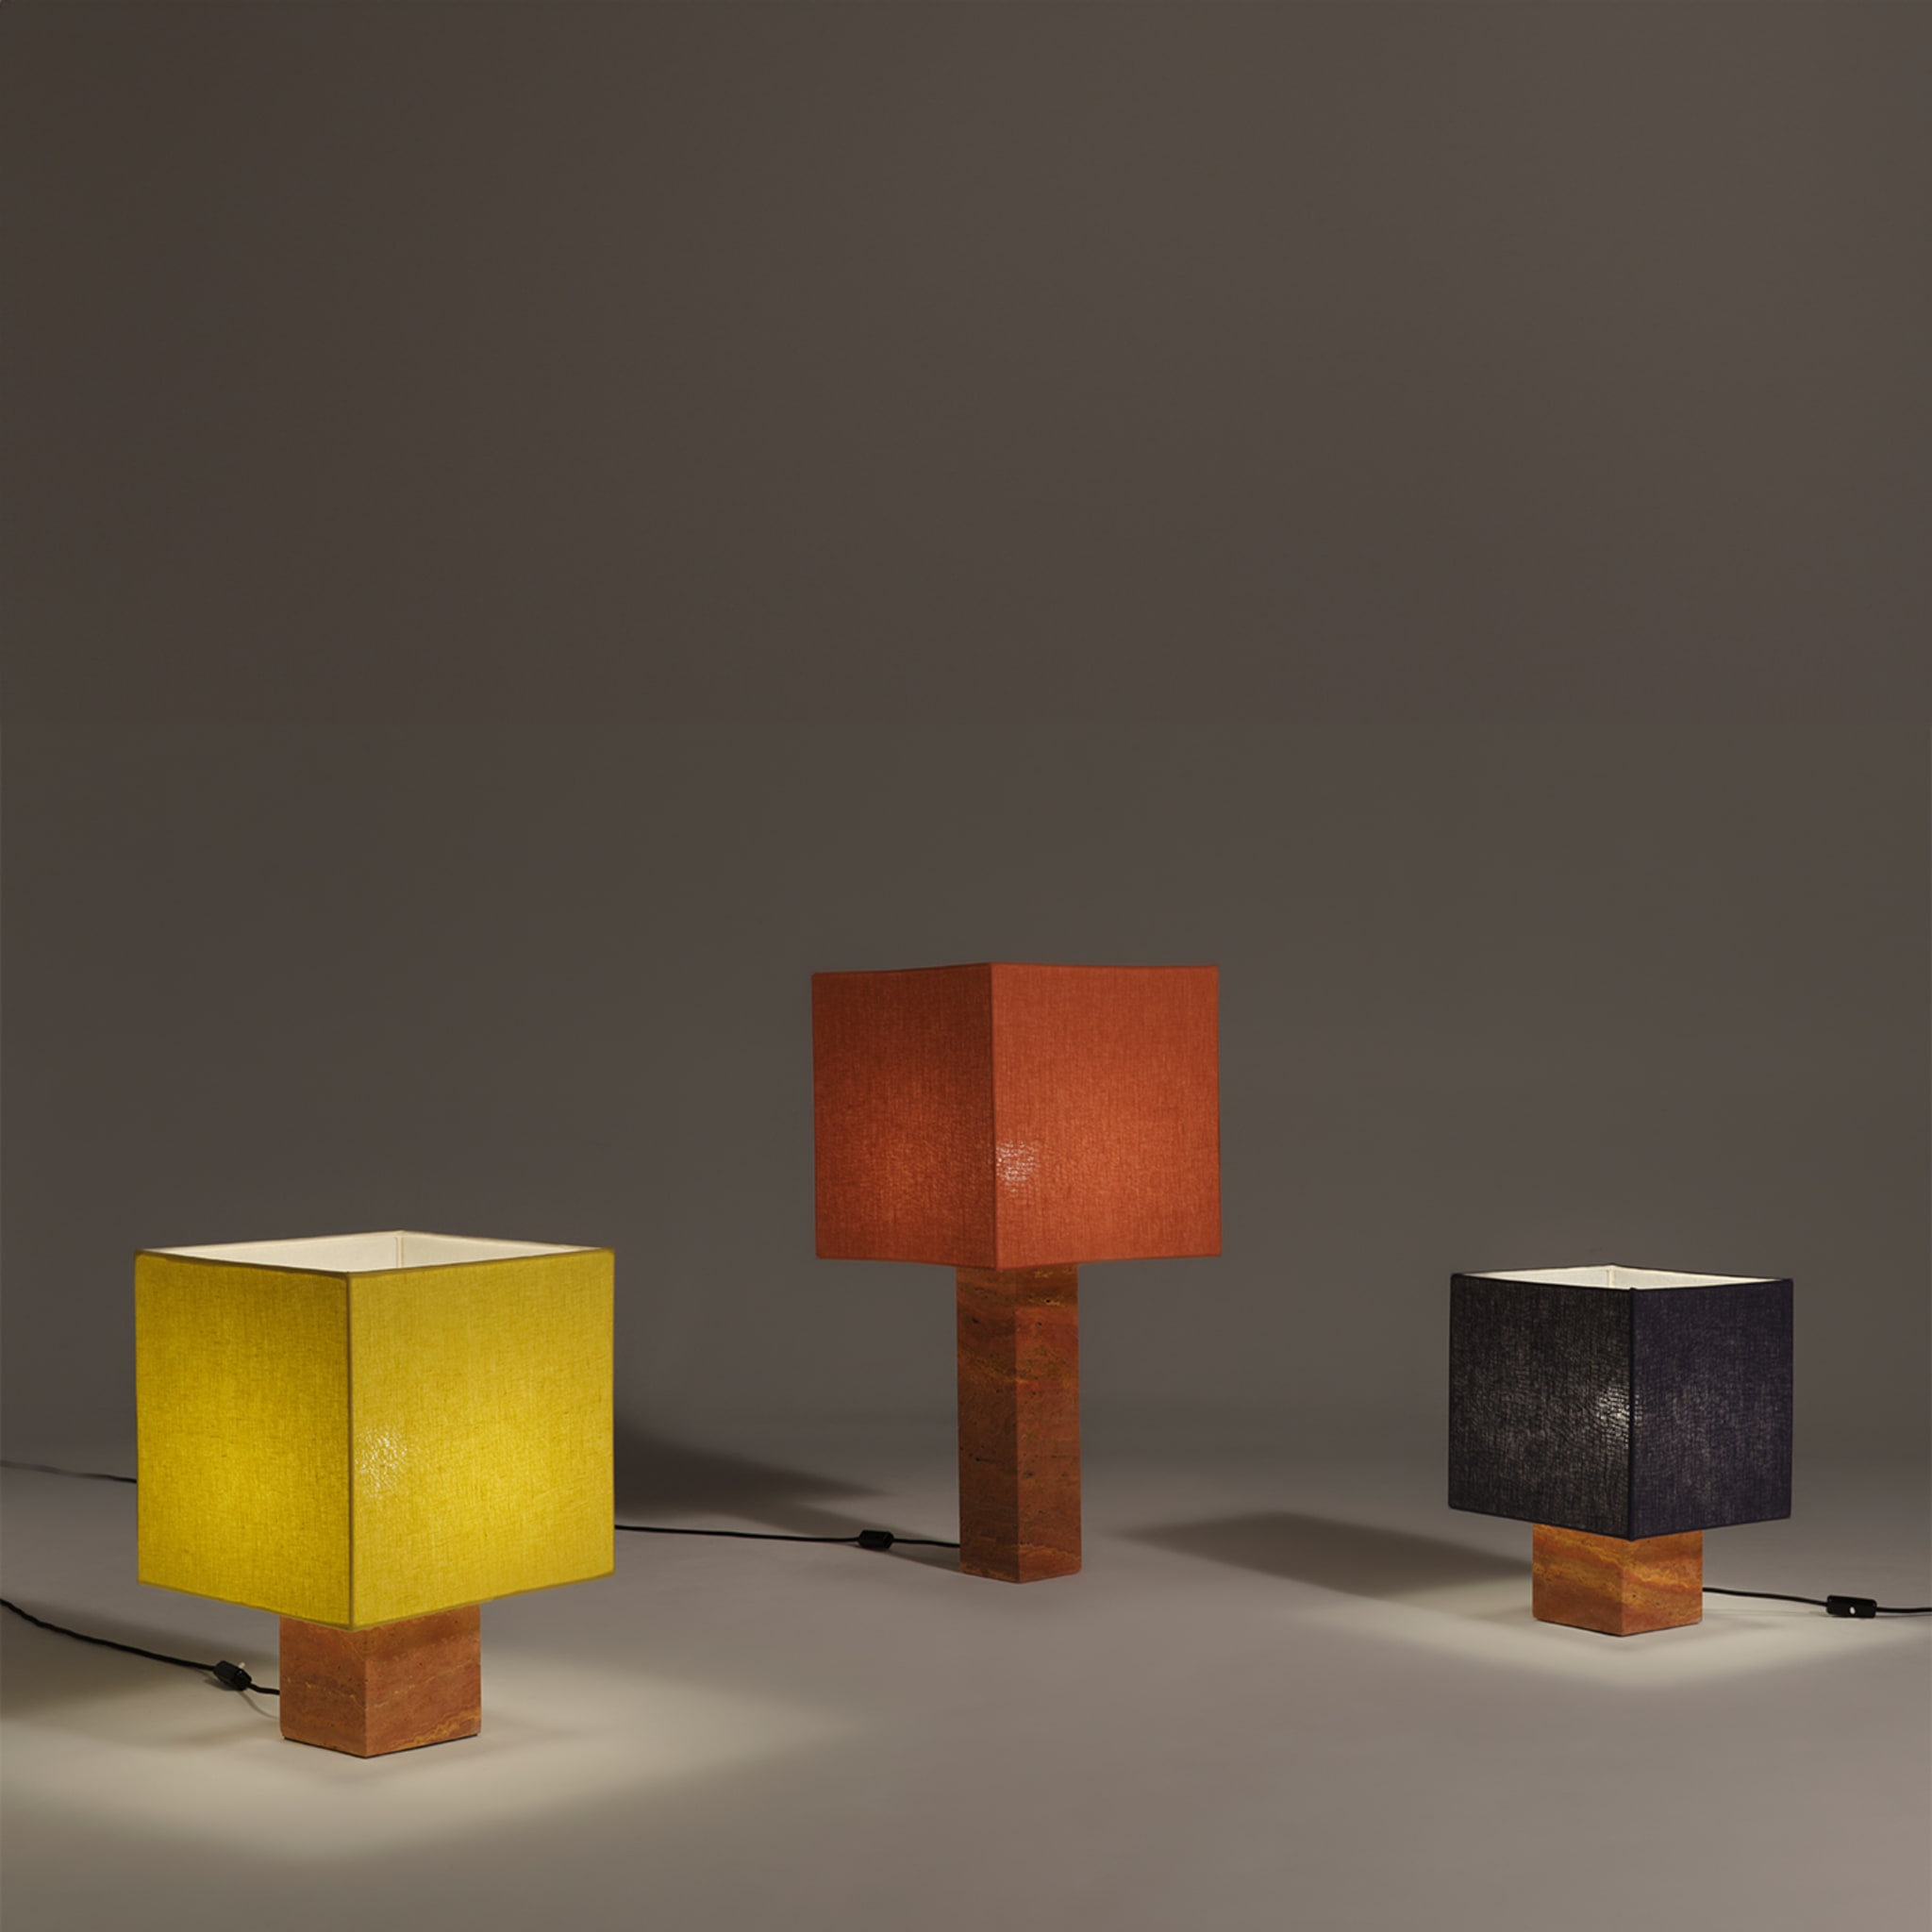 Roma Squared Small Yellow Table Lamp - Alternative view 2